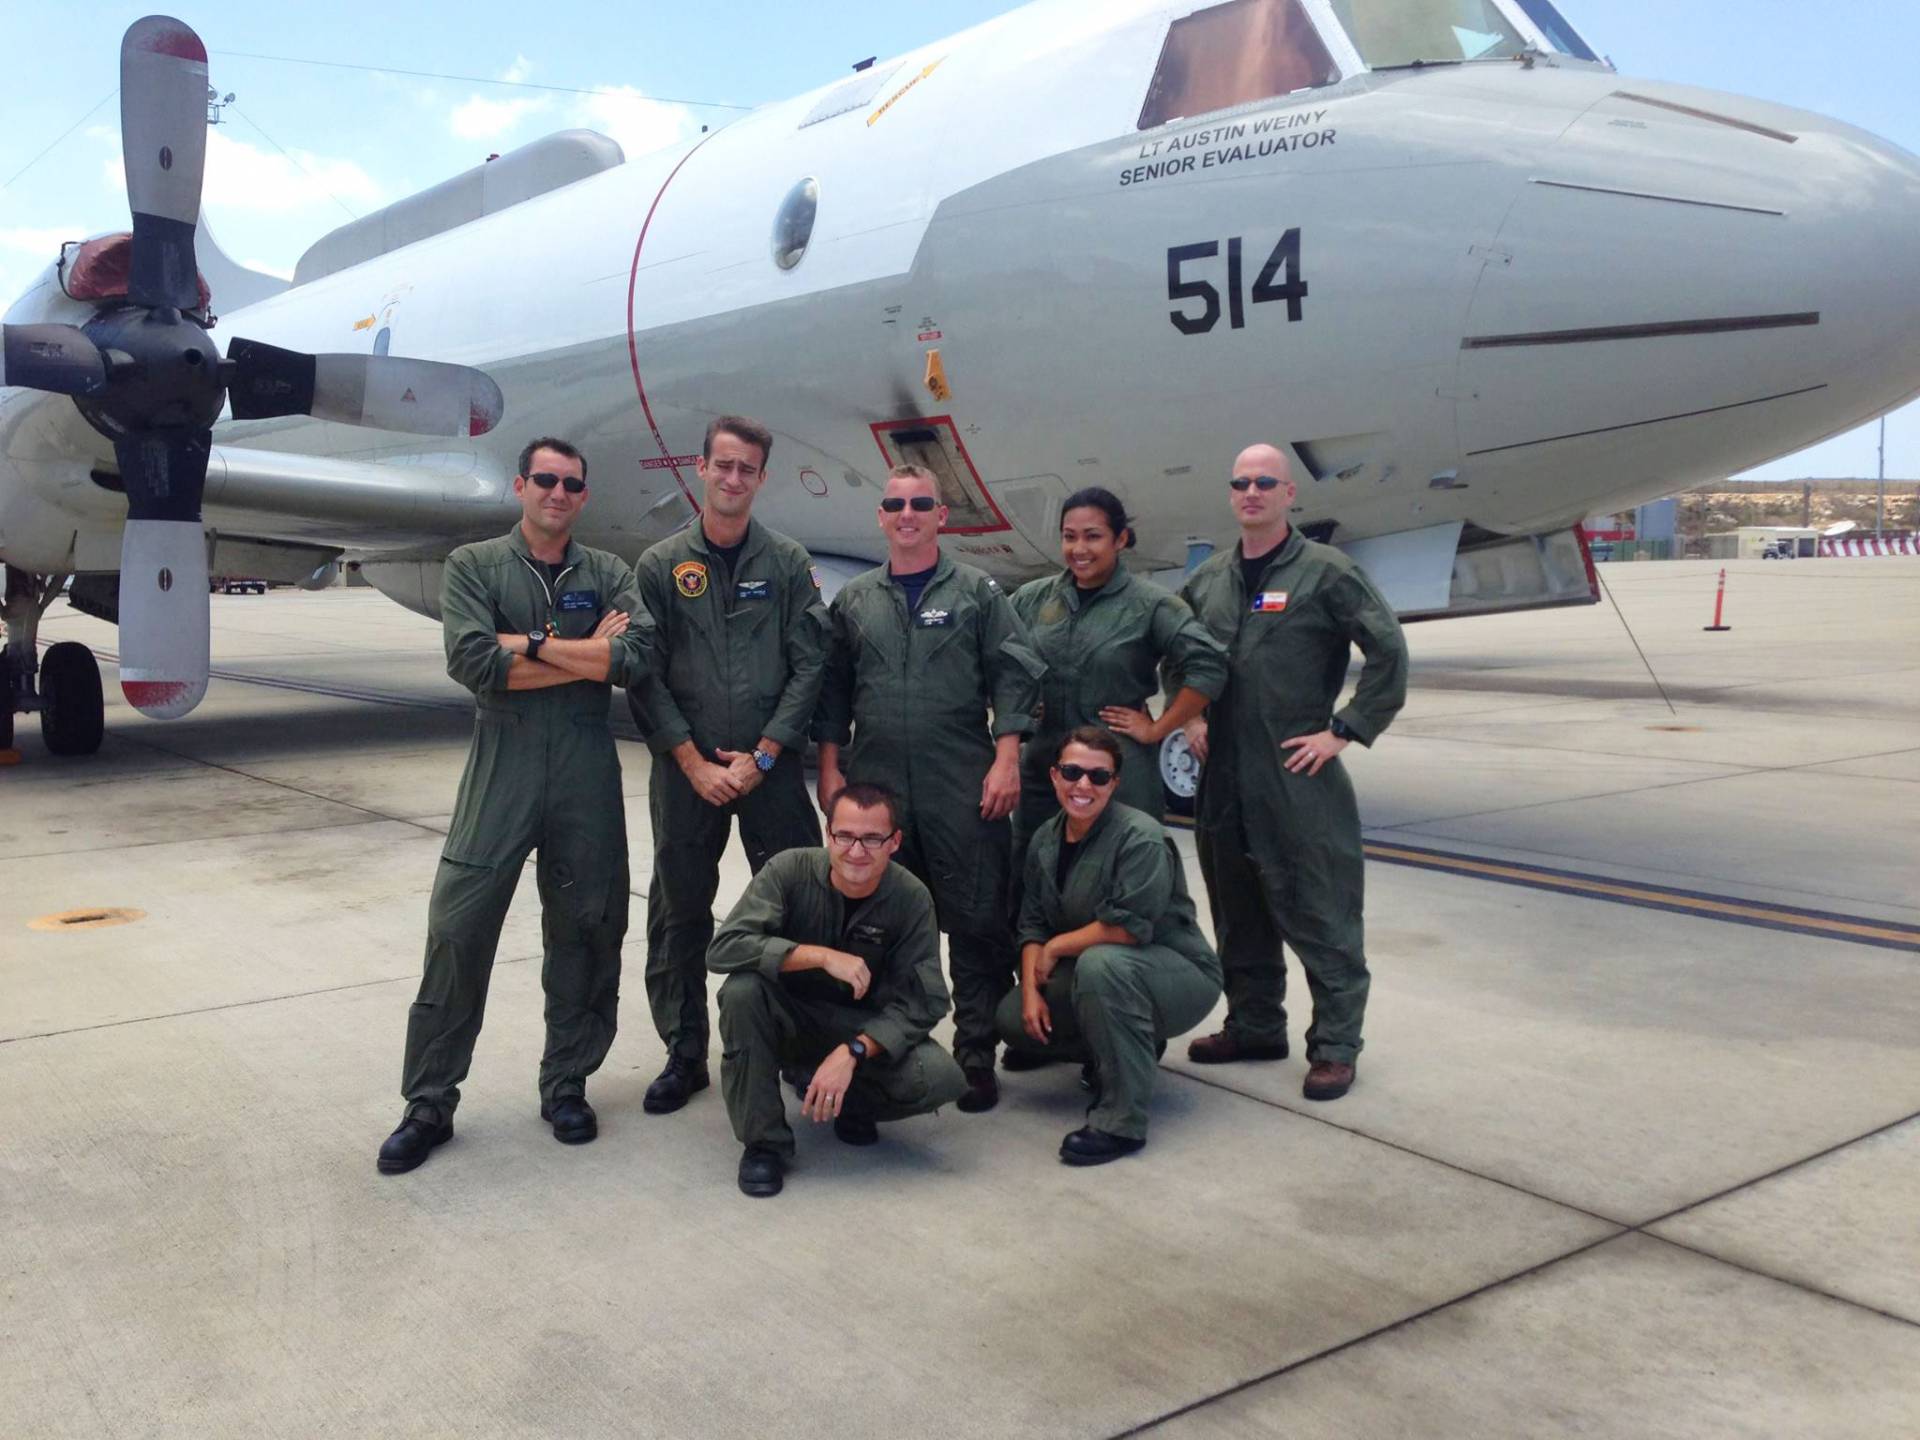 Clariza Macaspac and colleagues in front of a military jet